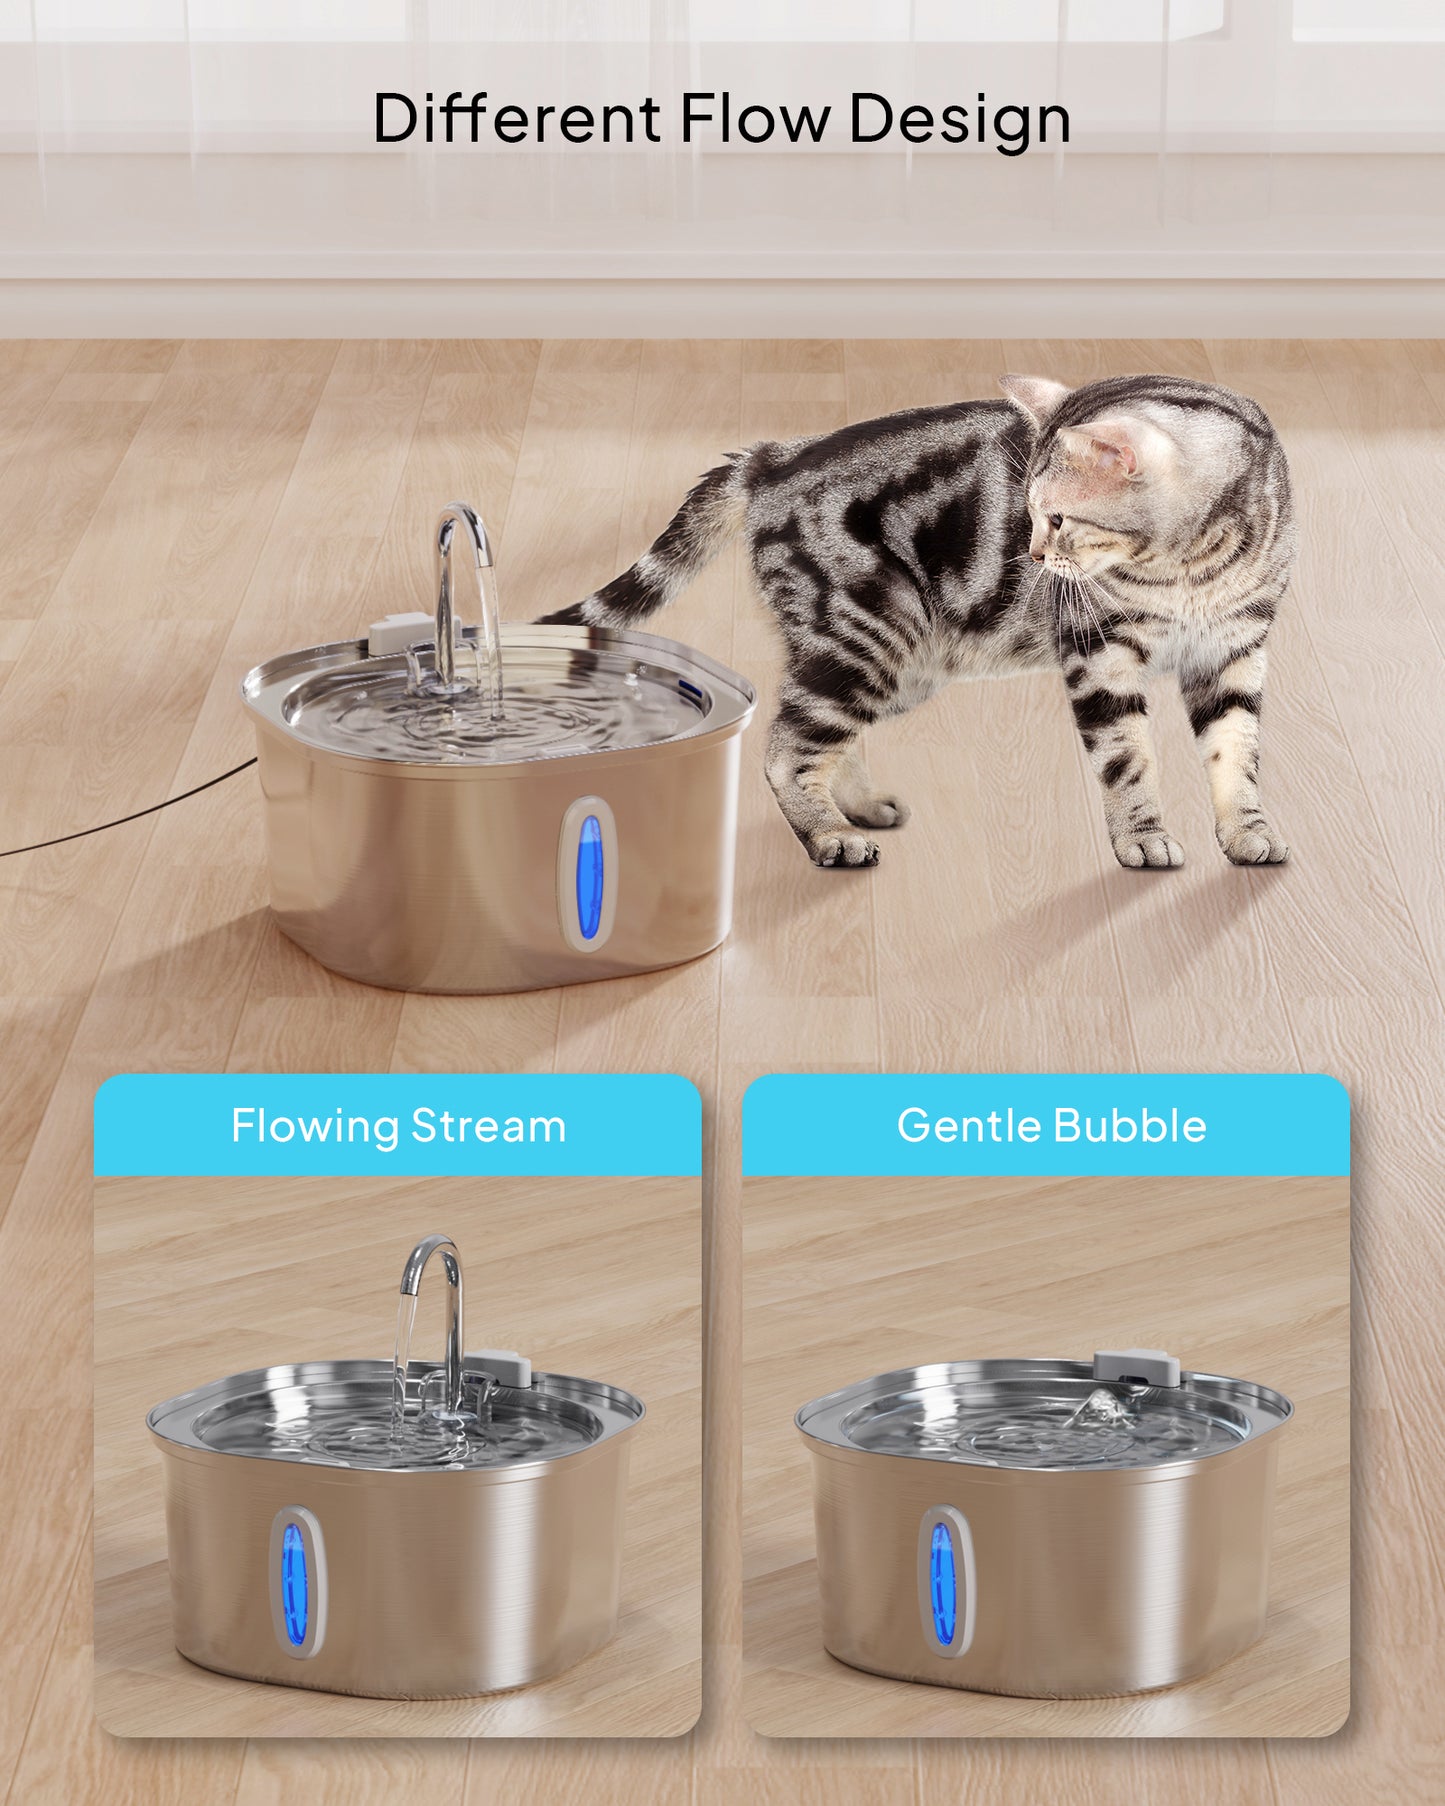 PEKTACO Cat Water Fountain - 3.2L/108oz Stainless Steel Pet Water Fountain Dog Water Dispenser Automatic Cat Fountain with Water Level Window for Cats Inside